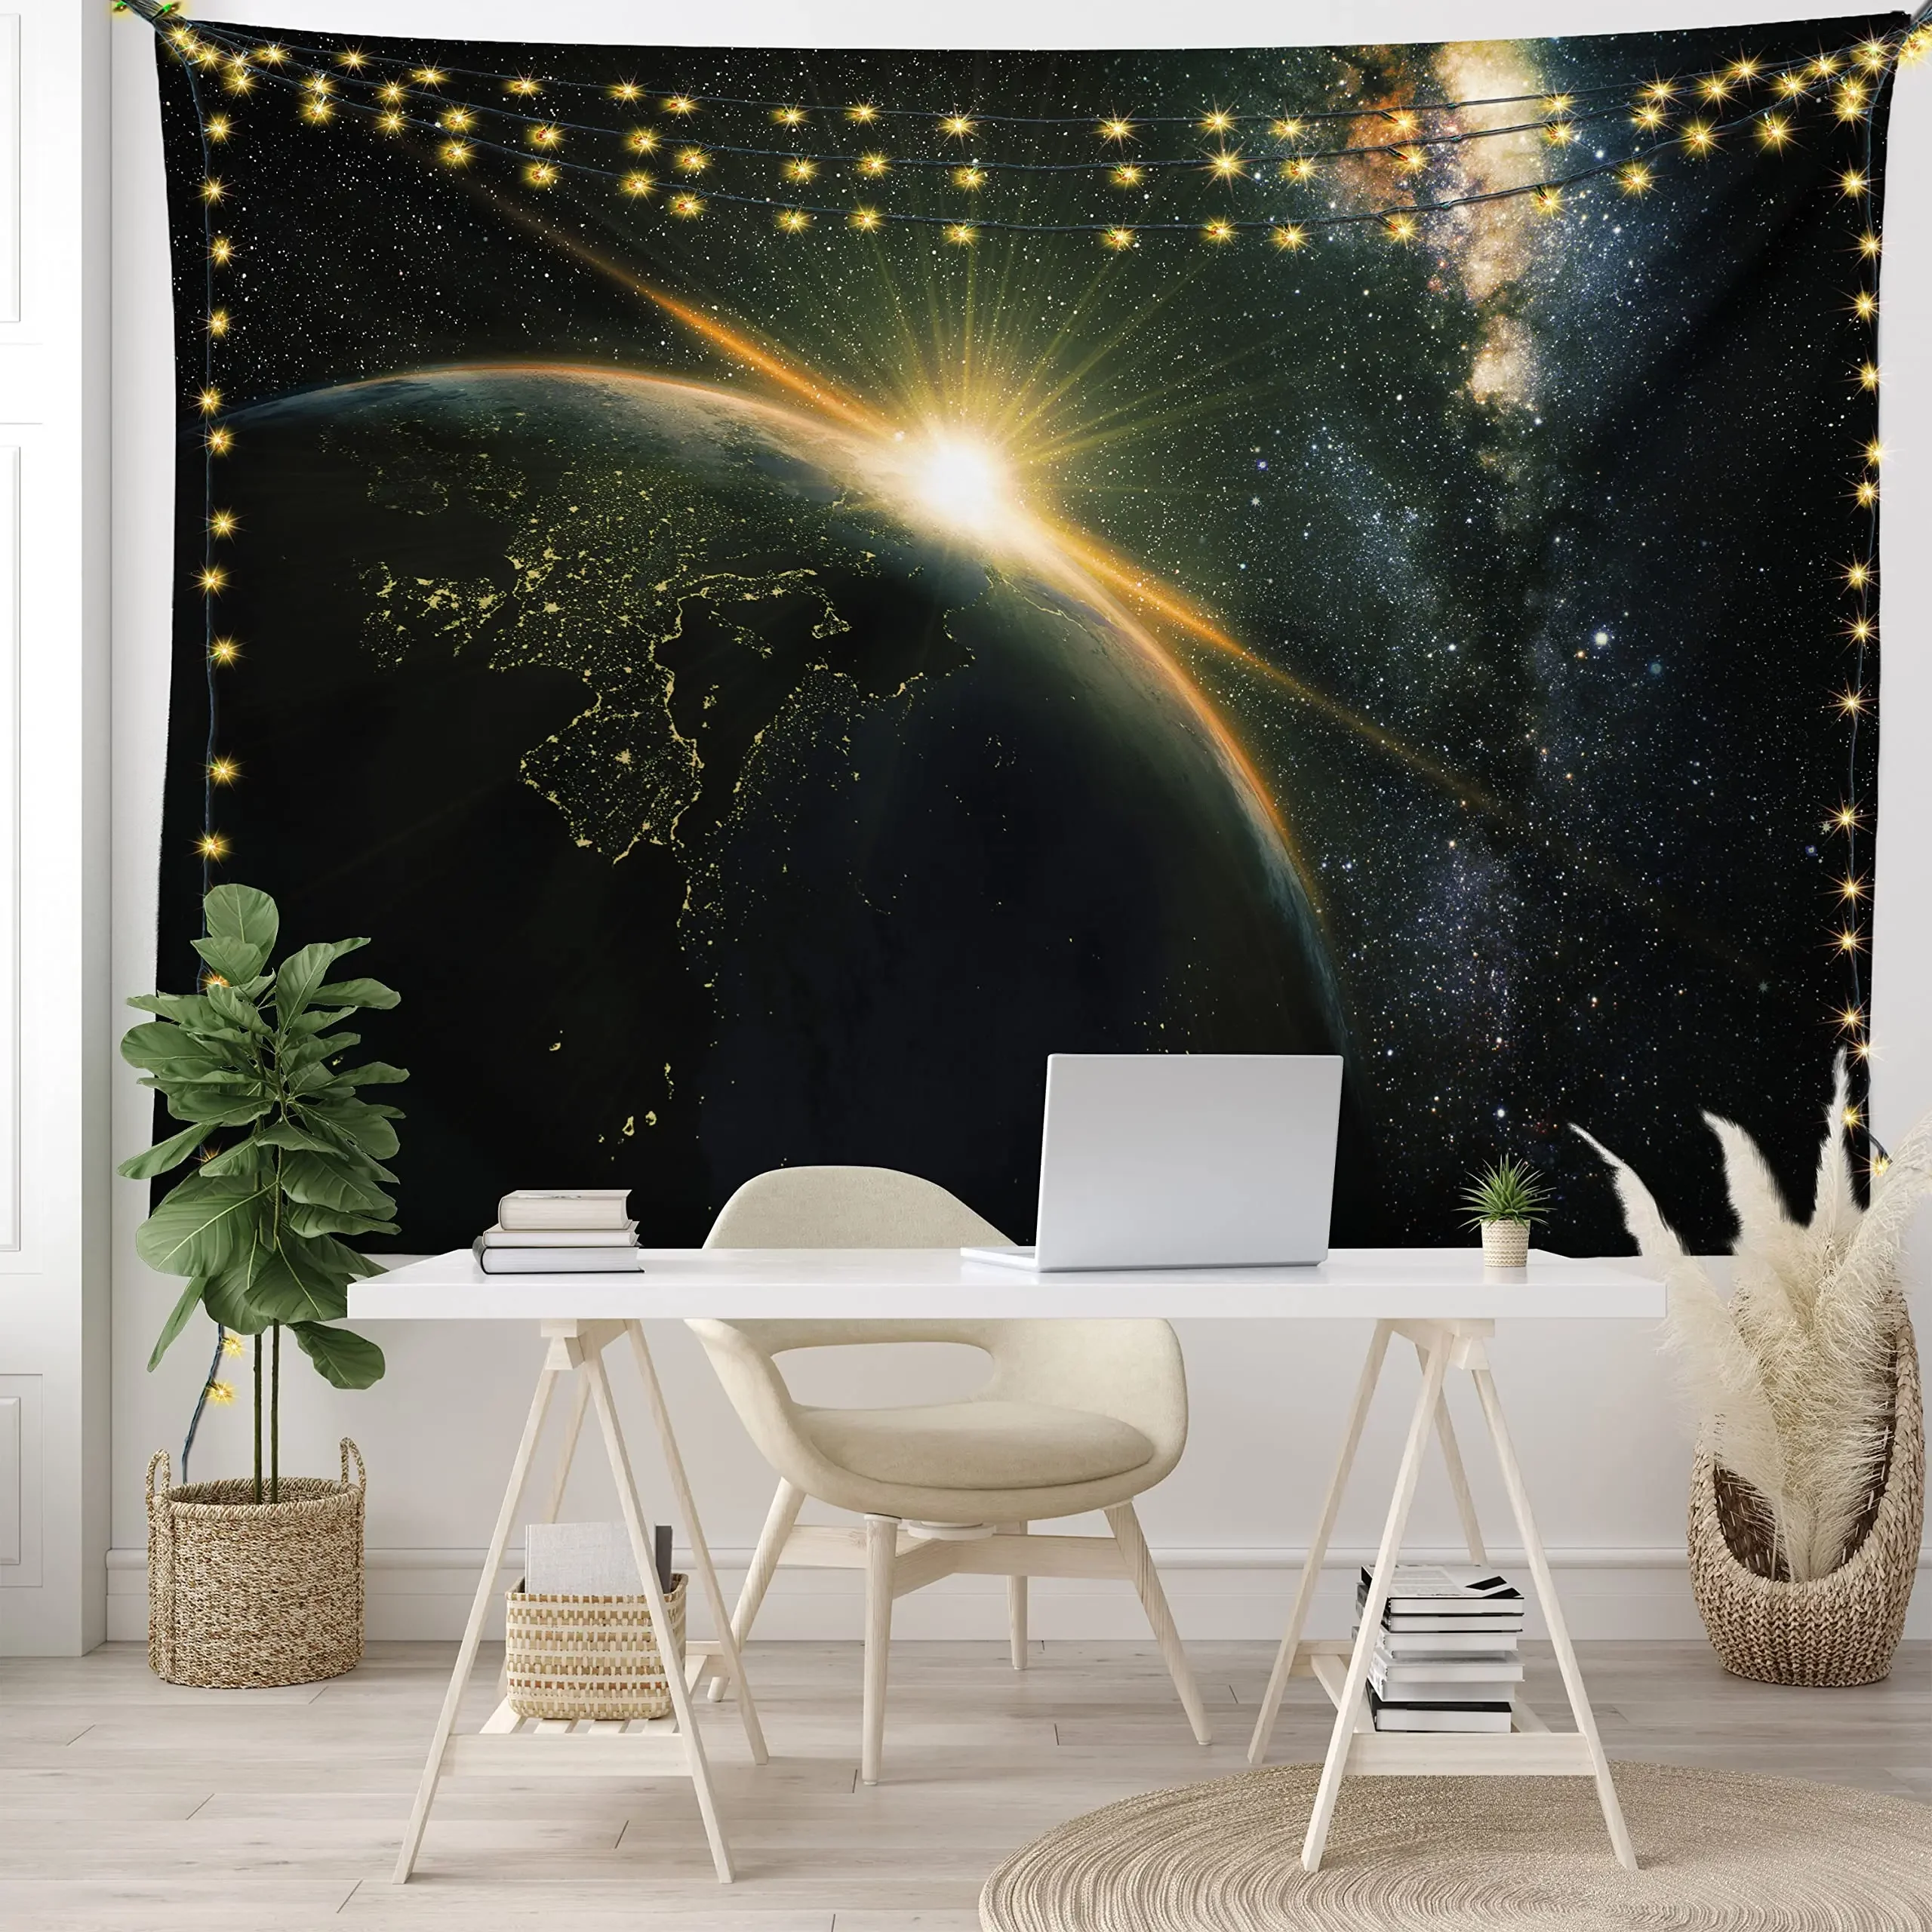 

Galaxy Tapestry Earth Sunrise From Outer Space Tapestry Sci-fi Style Tapestry Wall Hanging Decor for Bedroom Living Room Dorm